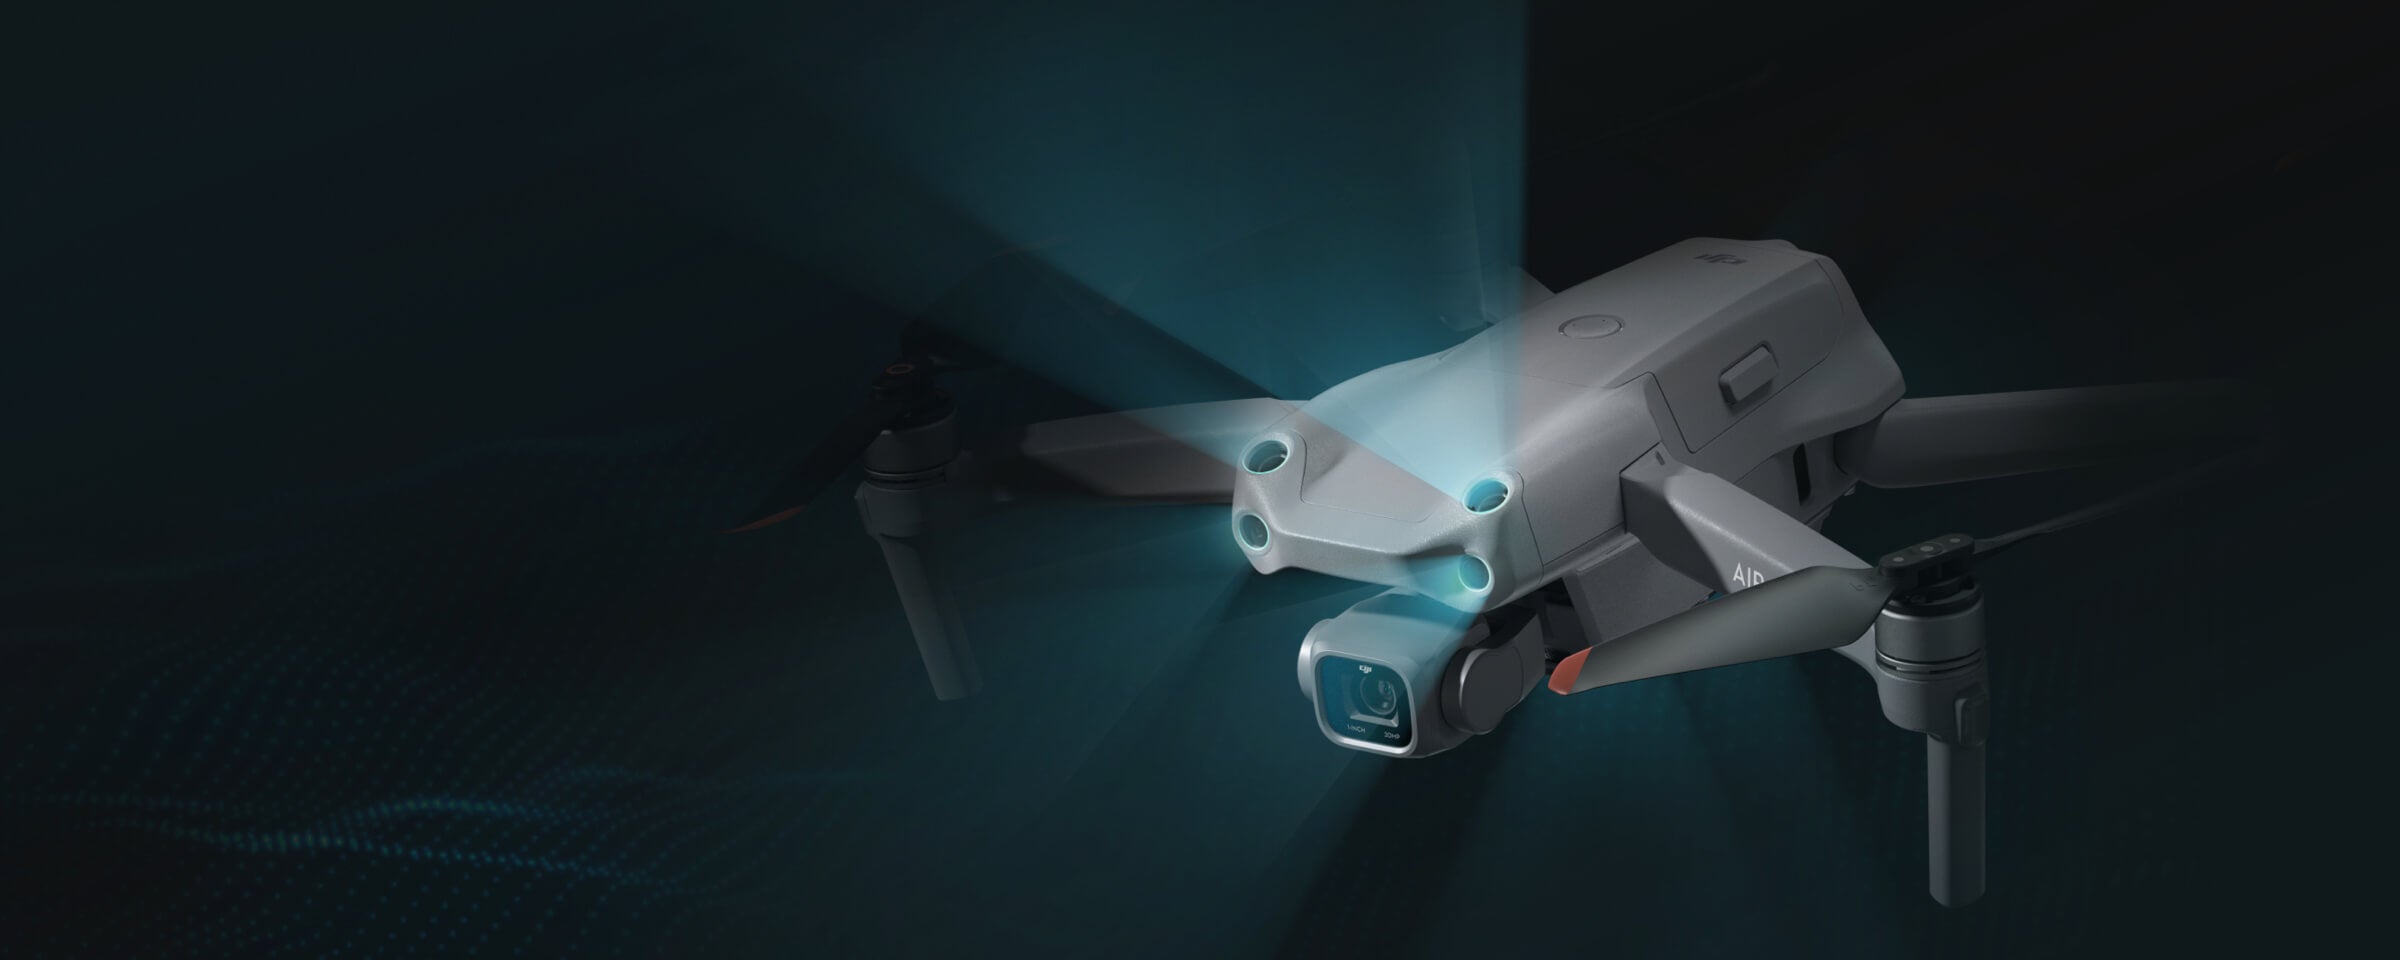 DJI Air 2S, the 10-bit Dlog-M color profile can record up to one billion colors while retaining